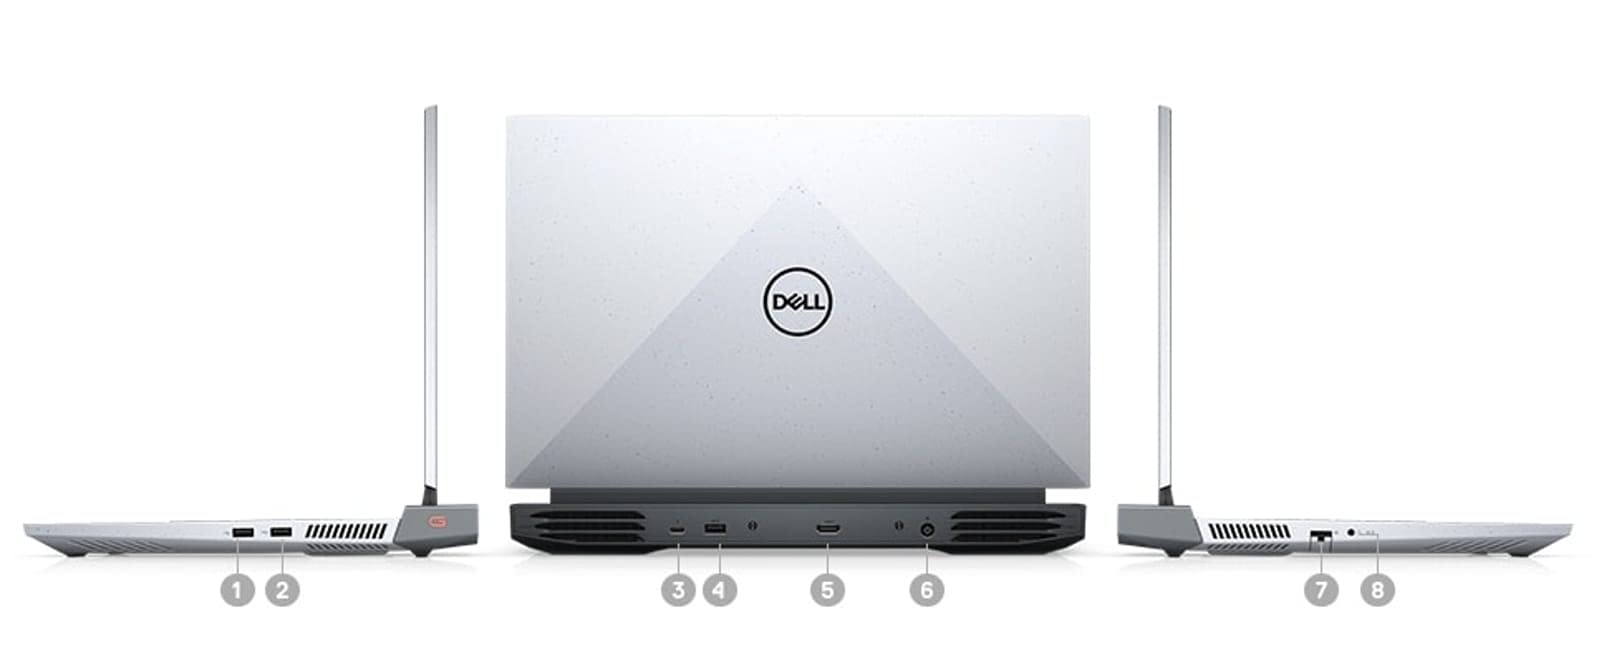 Dell G15 5515 Gaming Laptop (2021) | 15.6